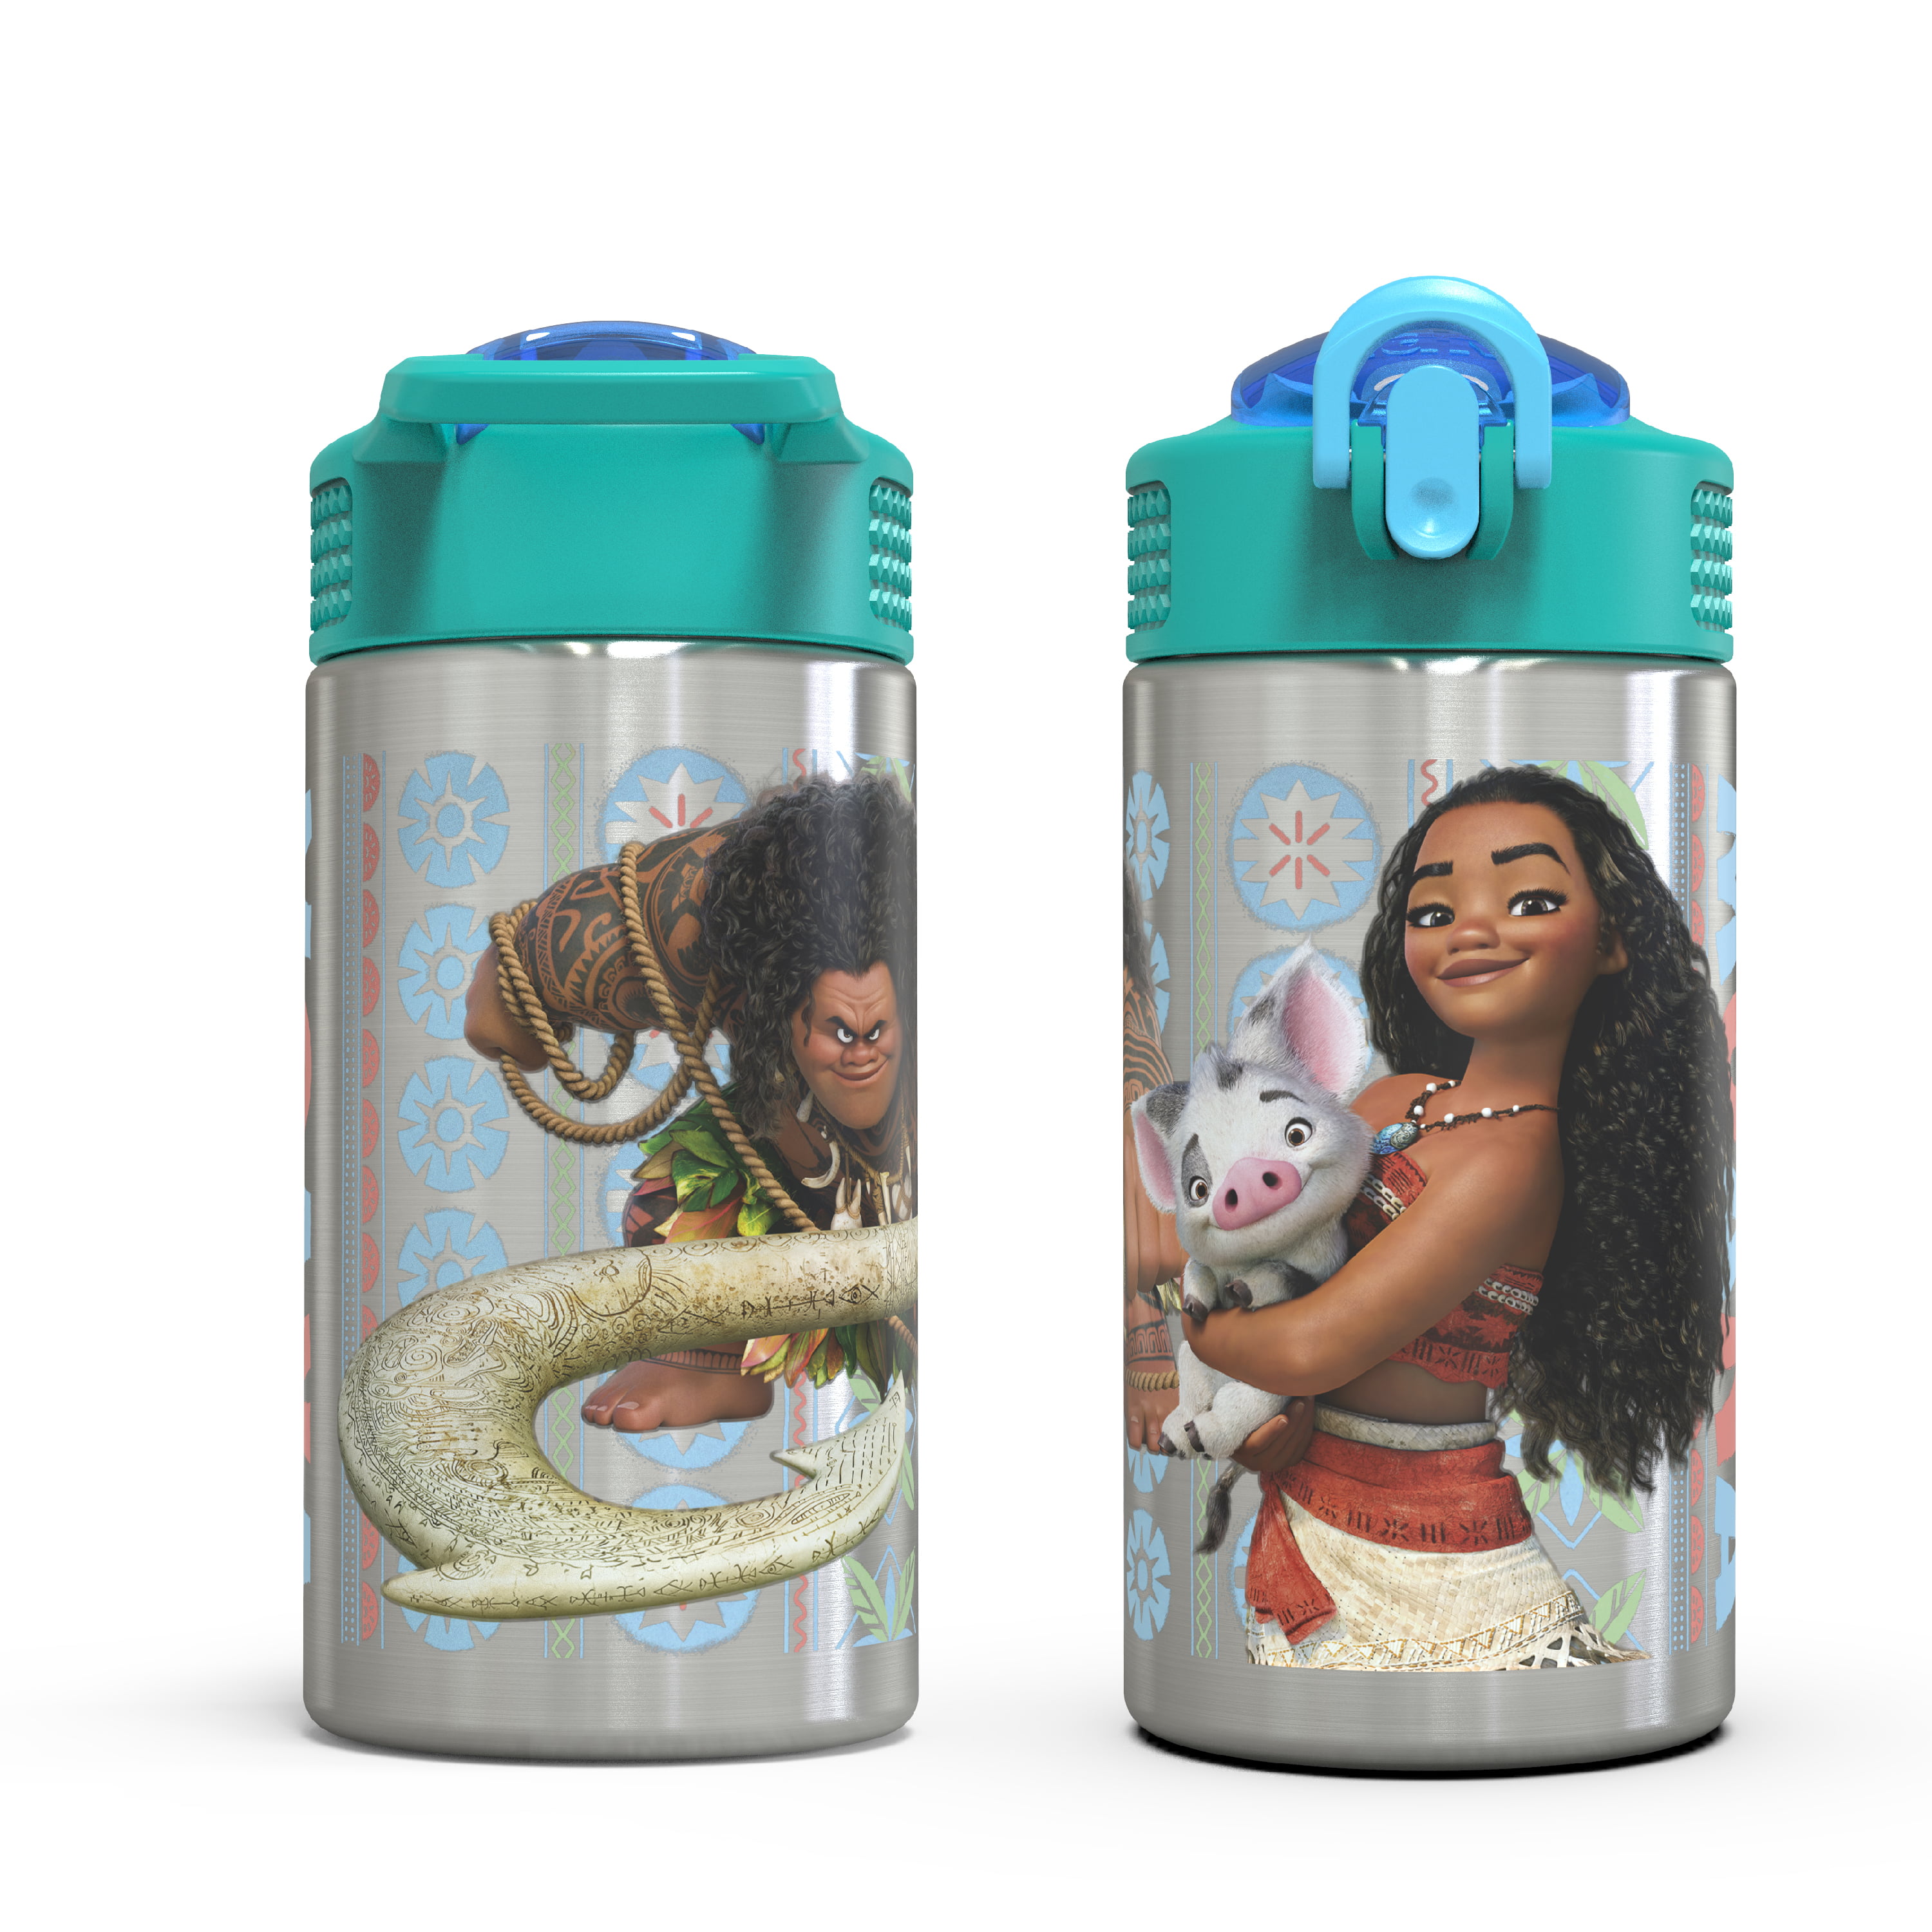  Disney Moana Water Bottle Flip Up Straw 600ml – Official Disney  Merchandise Kids Reusable Non Spill - BPA Free - Recyclable Plastic - Ideal  For School Nursery Sports Picnic - Turquoise & Pink : Baby